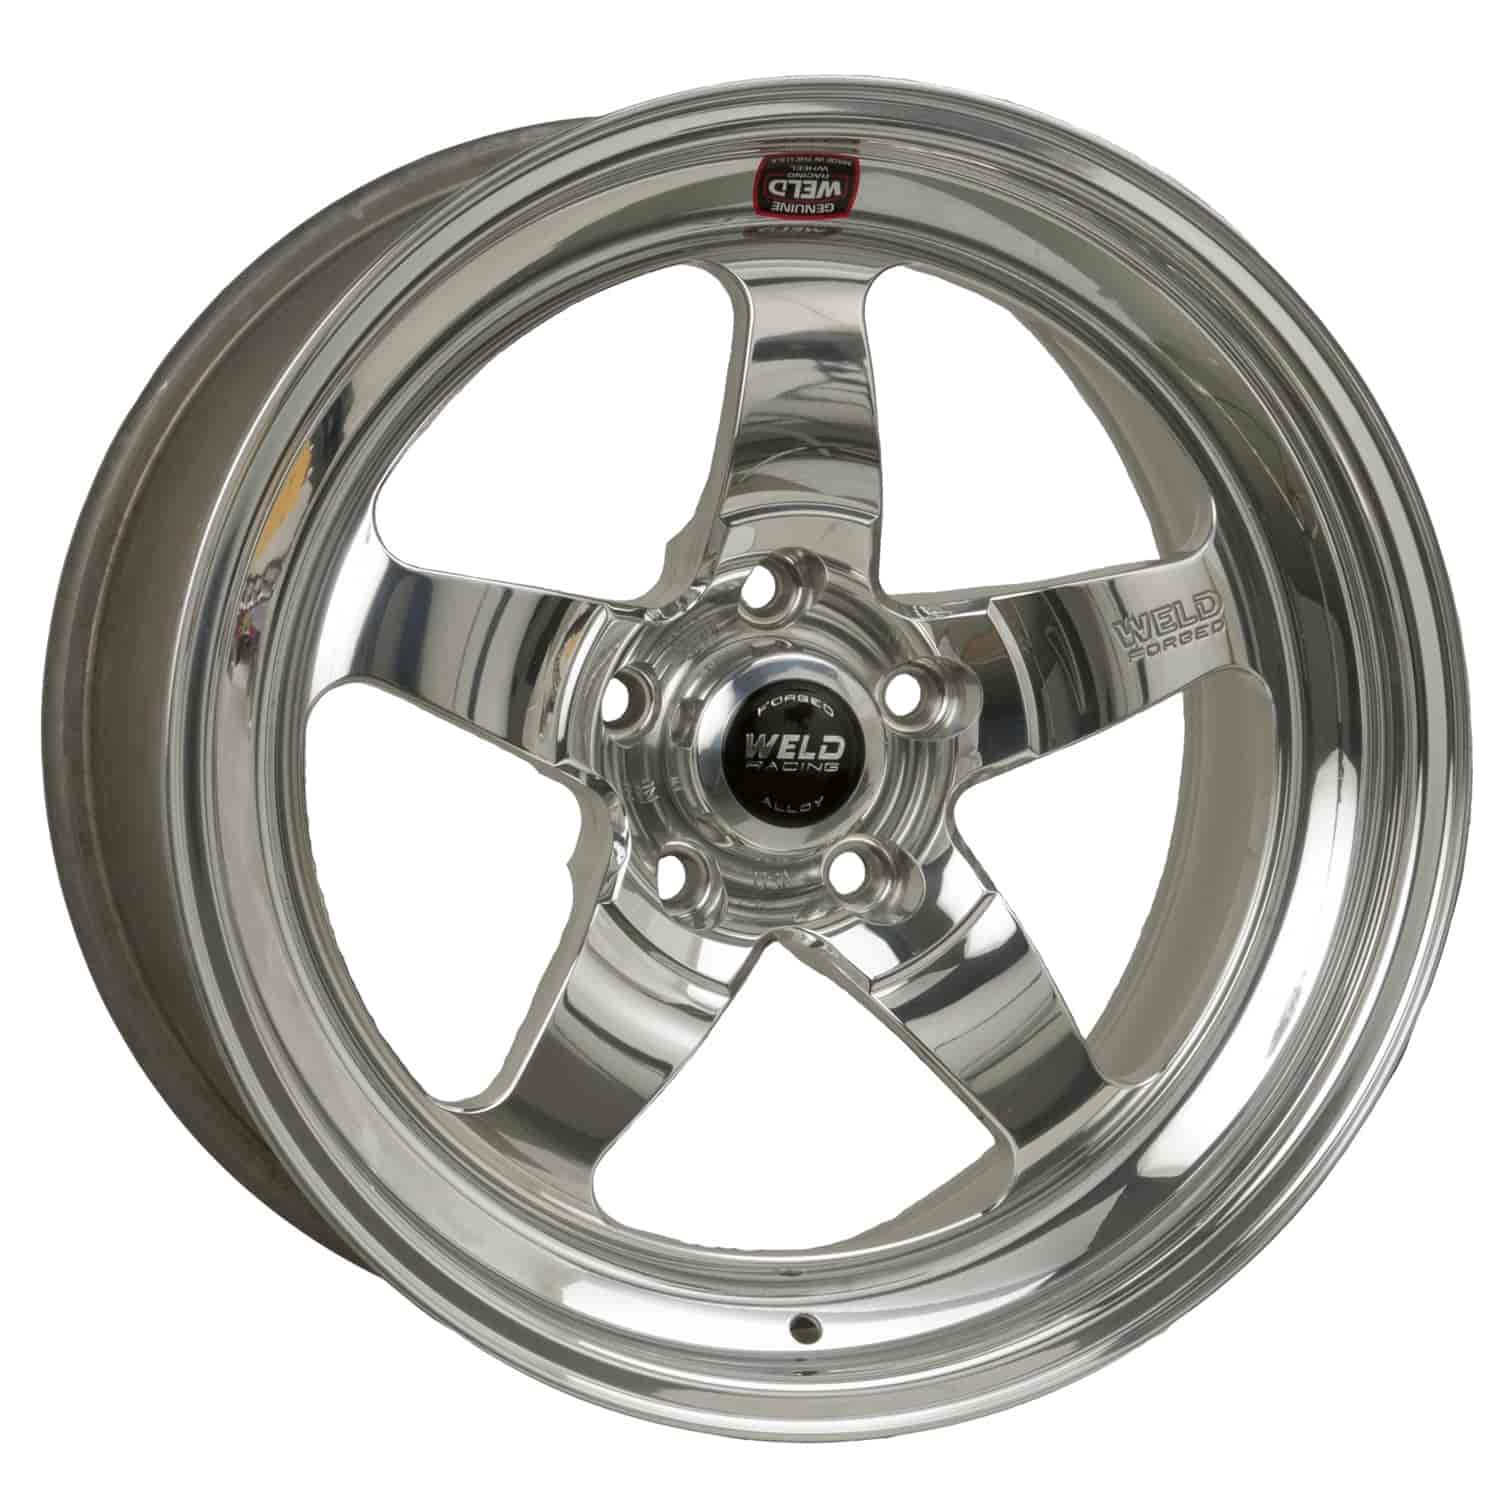 RT-S Series Wheel Size: 17" x 5" Bolt Circle: 5 x 120mm Rear Spacing: 2.20" Polished